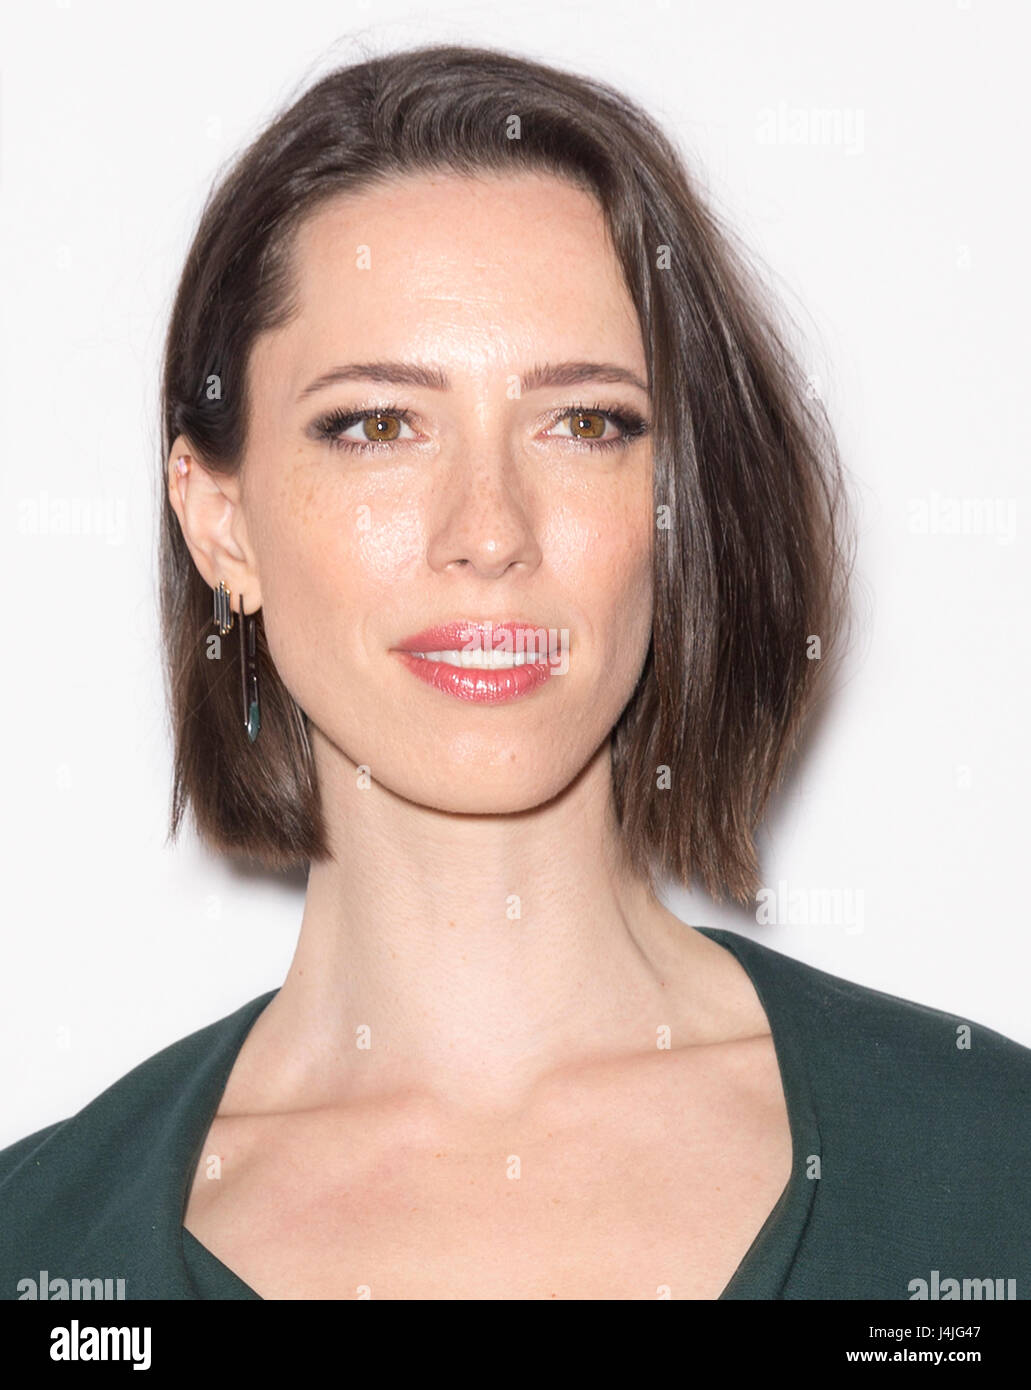 NEW YORK, NY - APRIL 22, 2017: Actress Rebecca Hall attends 'Permission' Premiere at the SVA Theatre during 2017 Tribeca Film Festival Stock Photo